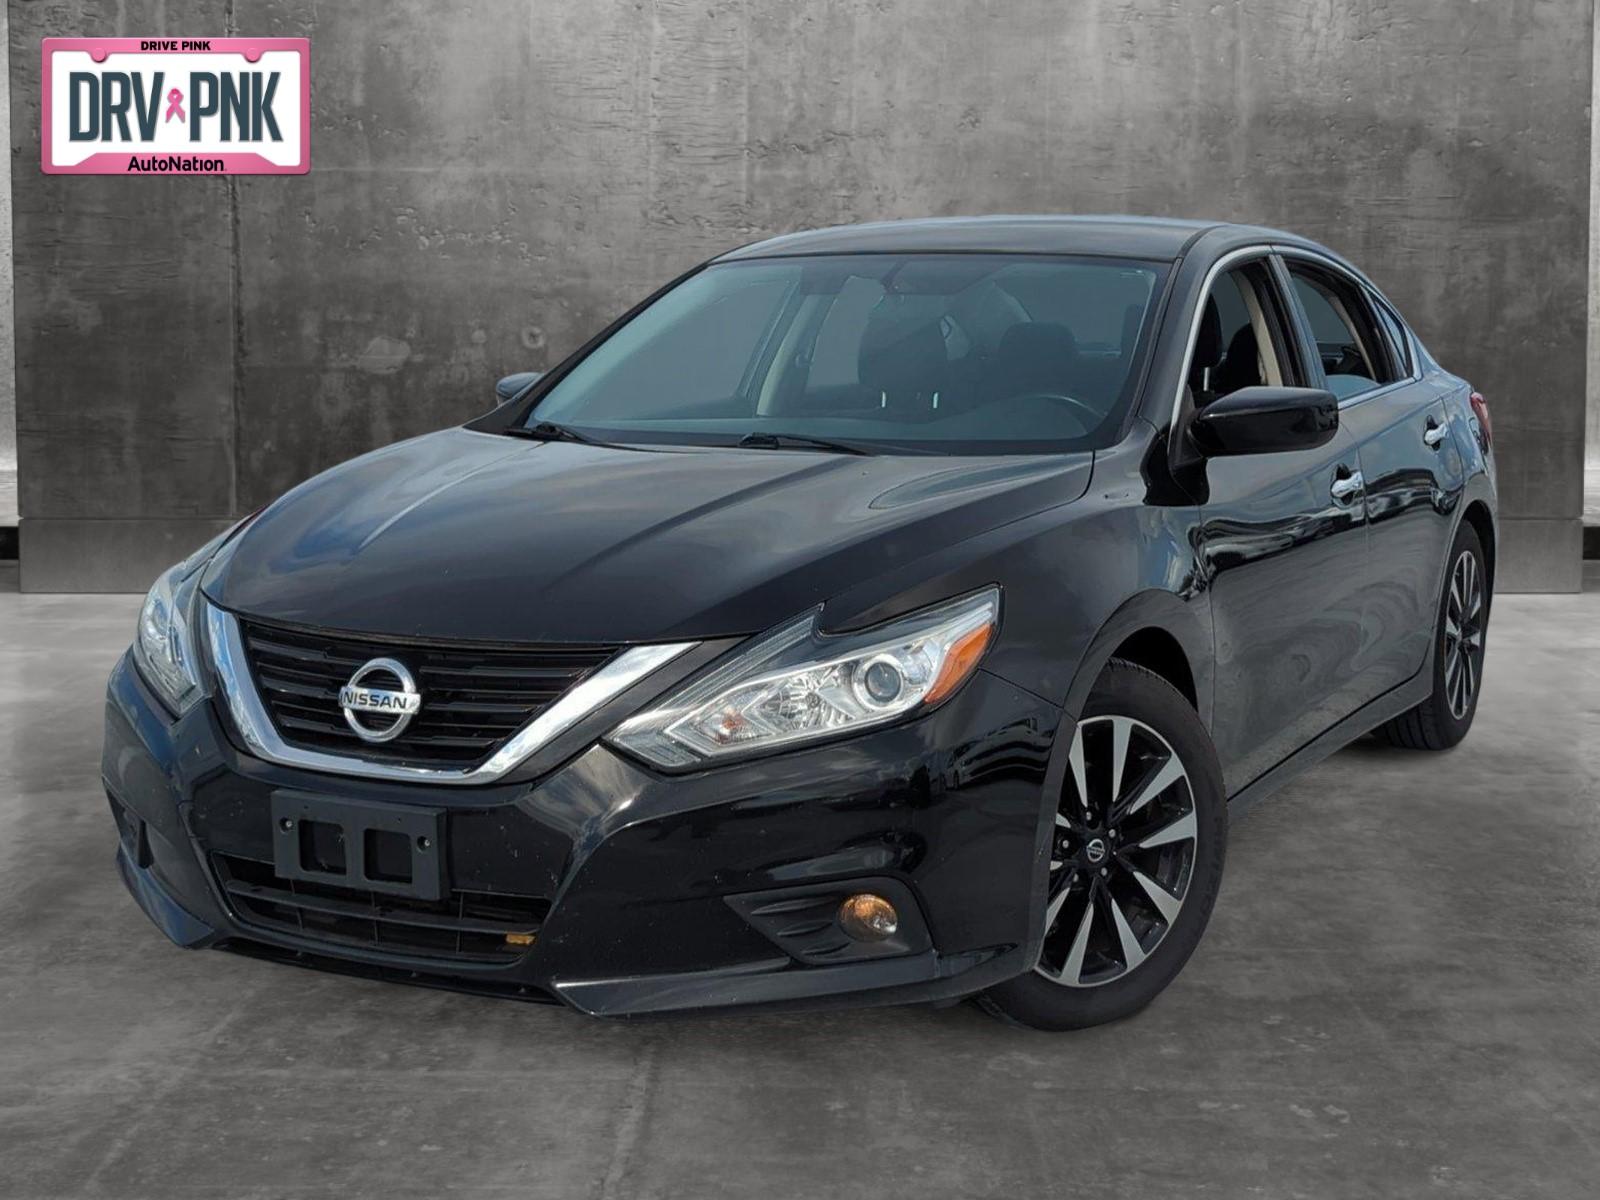 2018 Nissan Altima Vehicle Photo in Ft. Myers, FL 33907